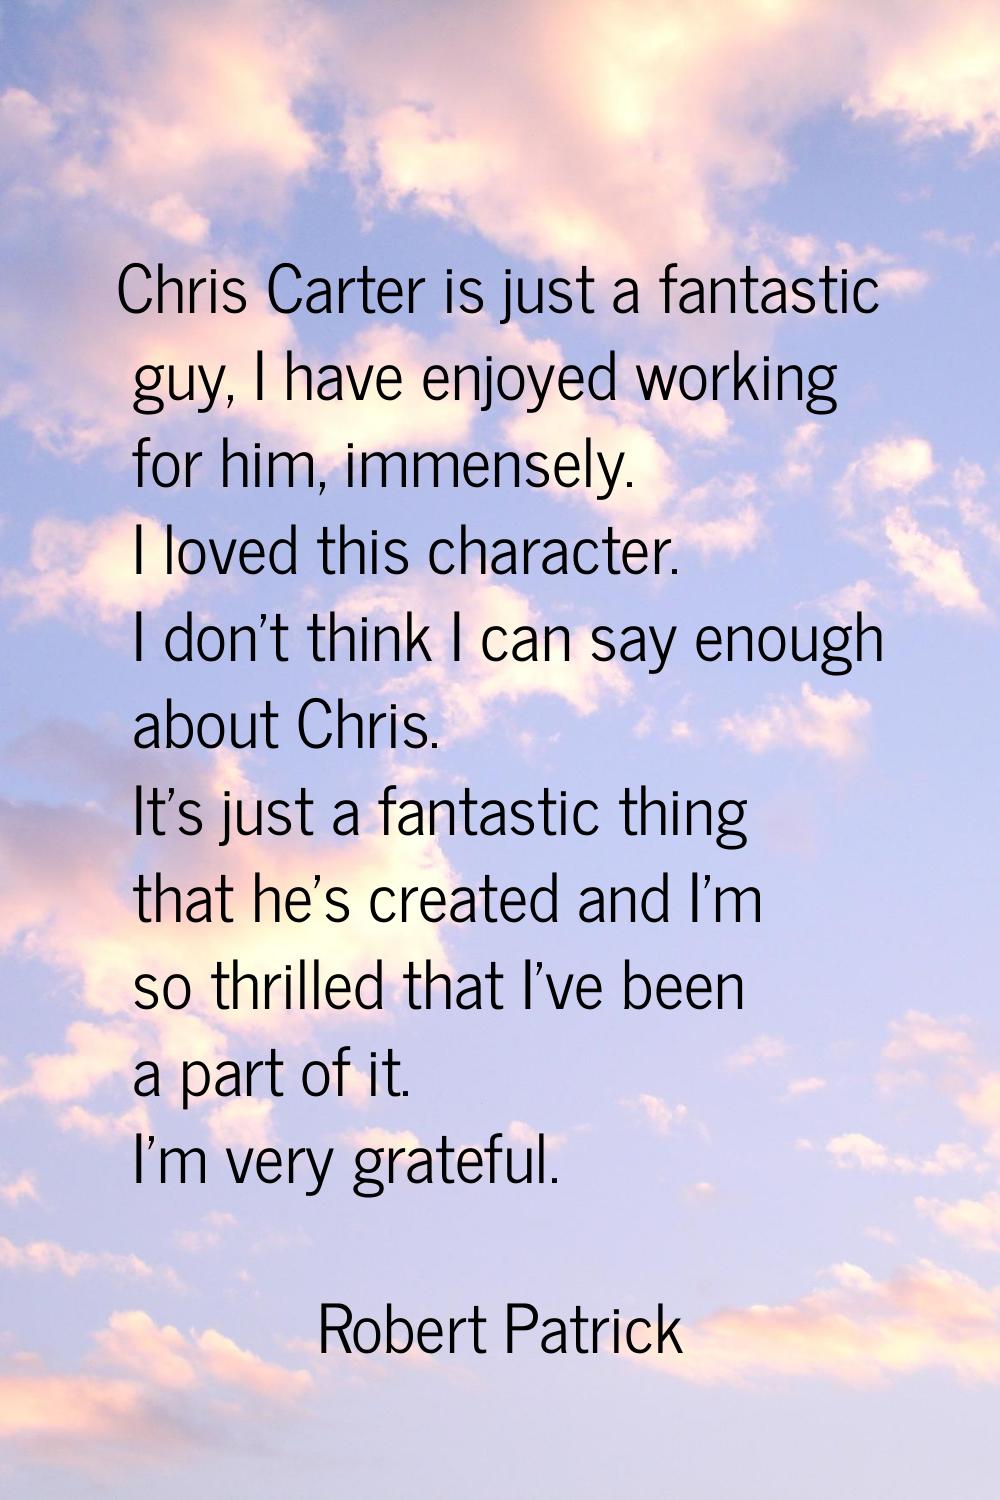 Chris Carter is just a fantastic guy, I have enjoyed working for him, immensely. I loved this chara